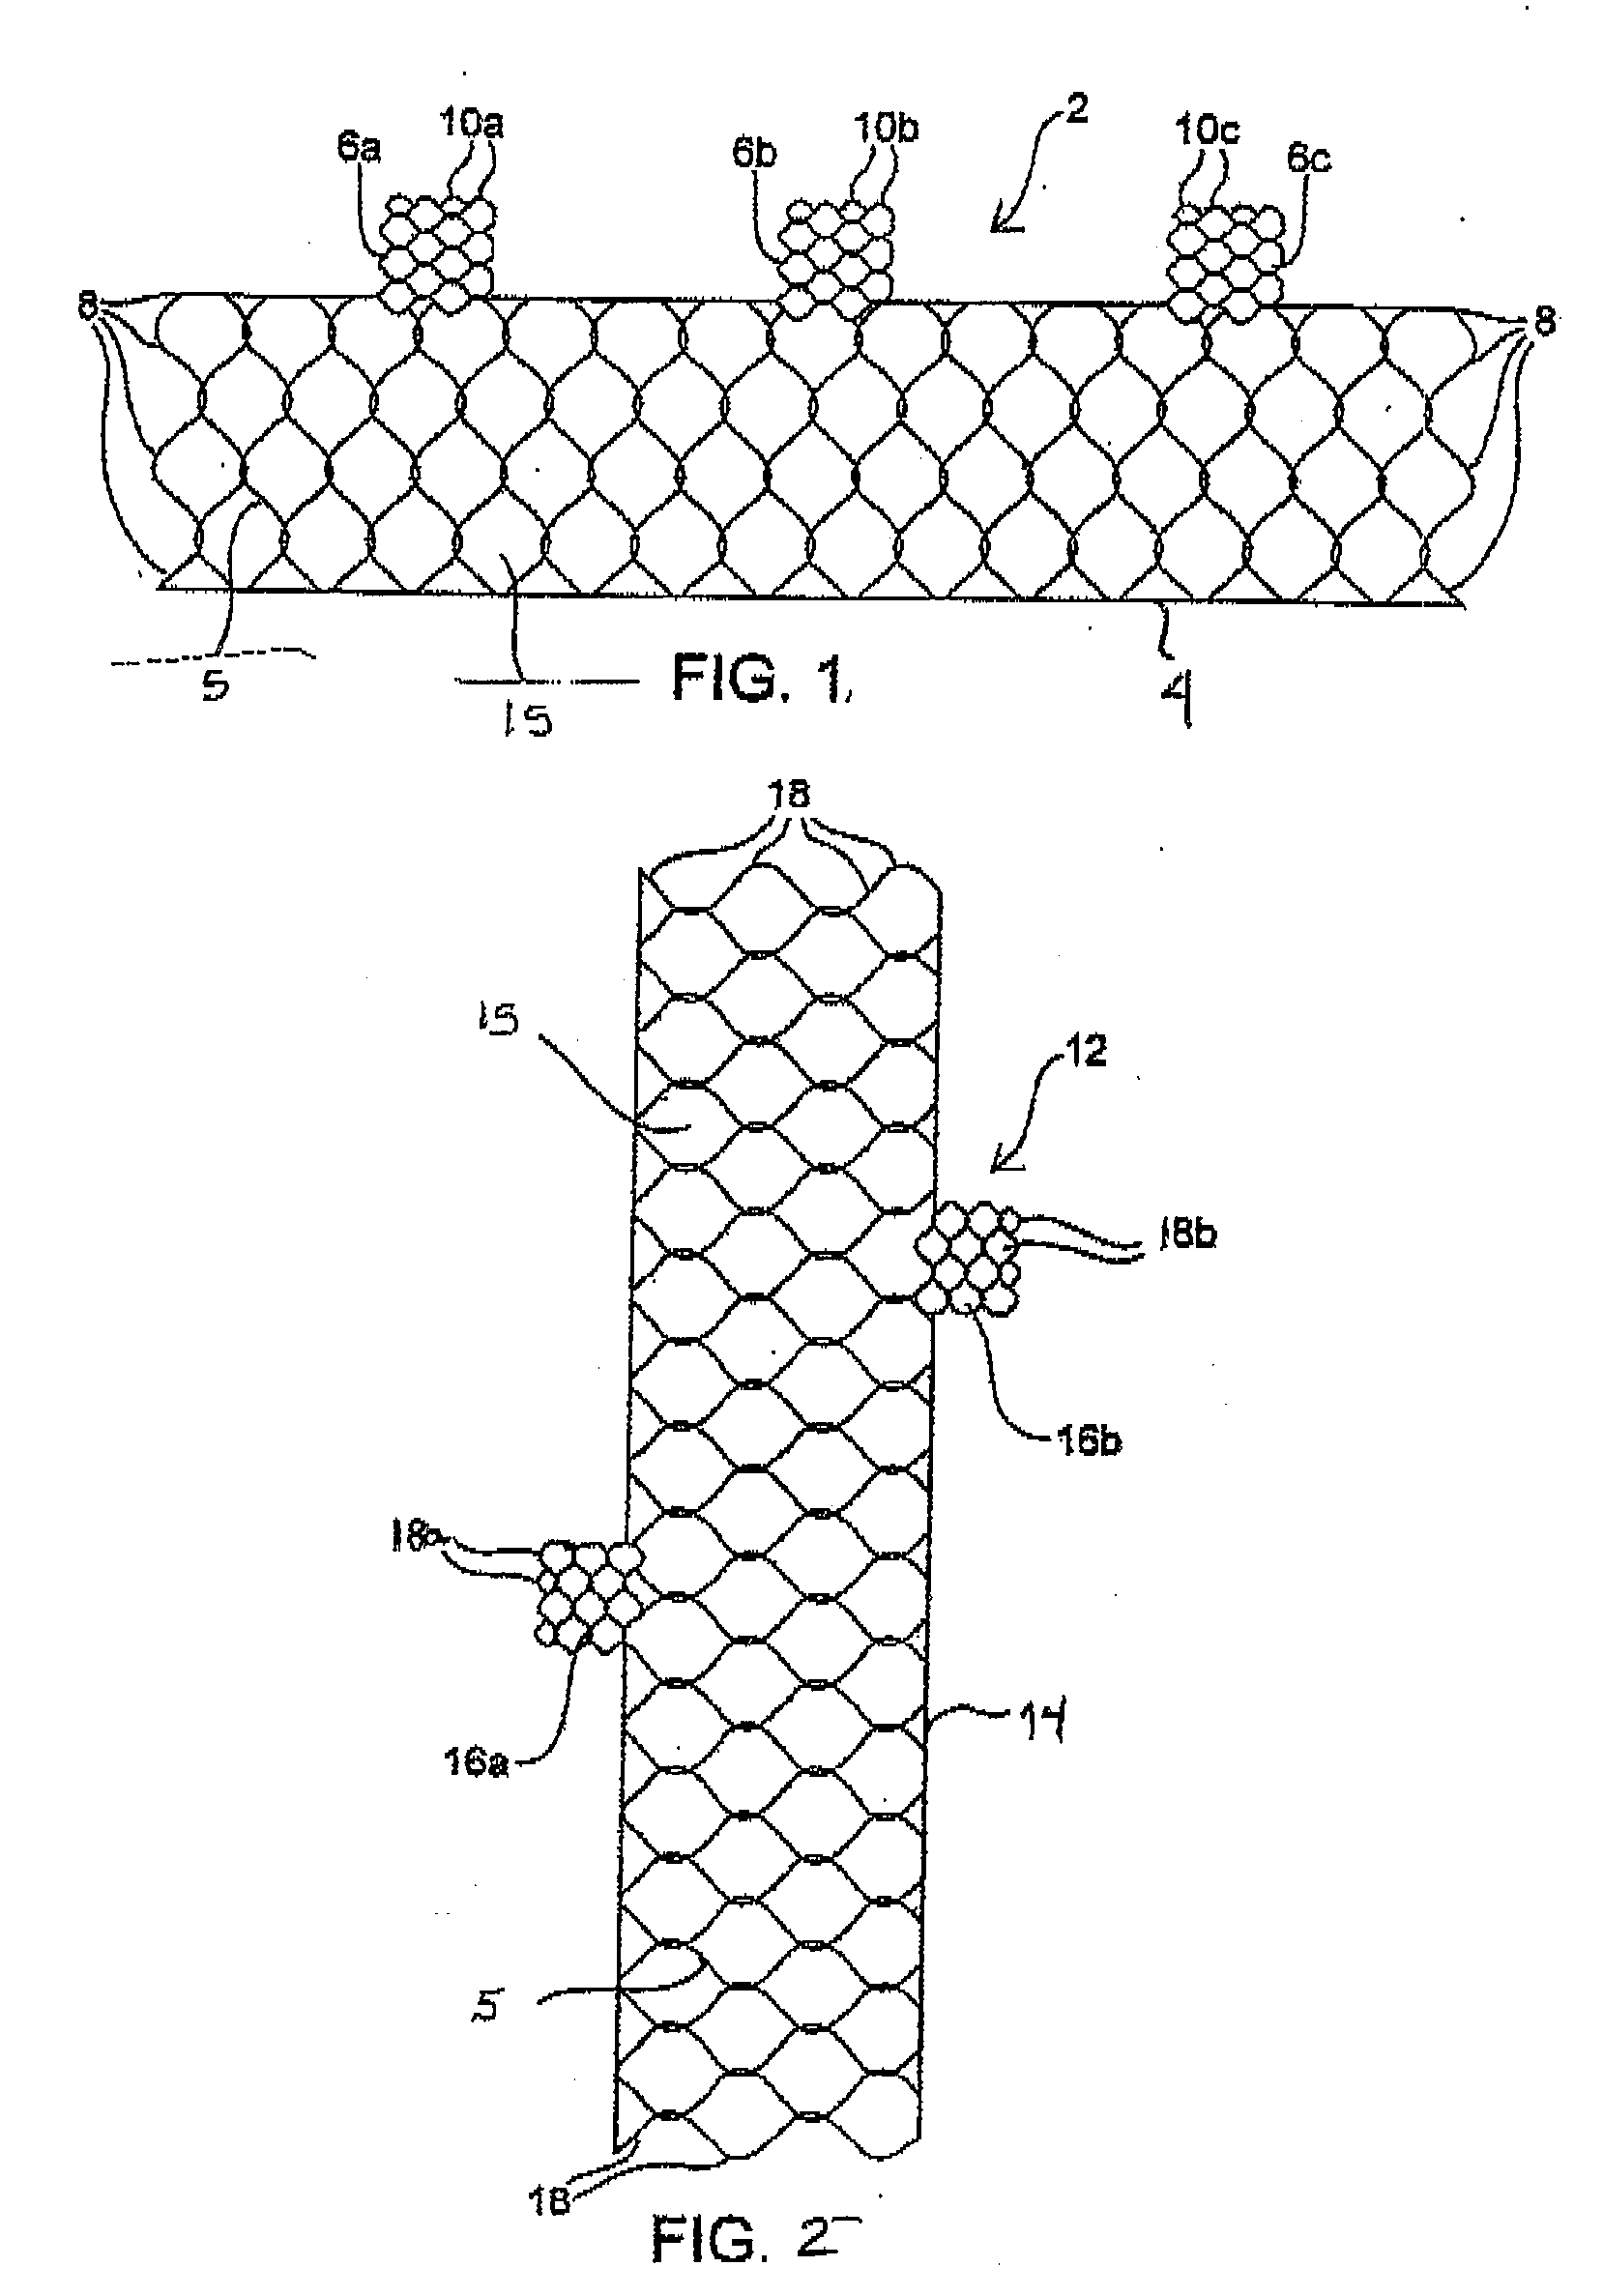 Vascular implants and methods of fabricating the same